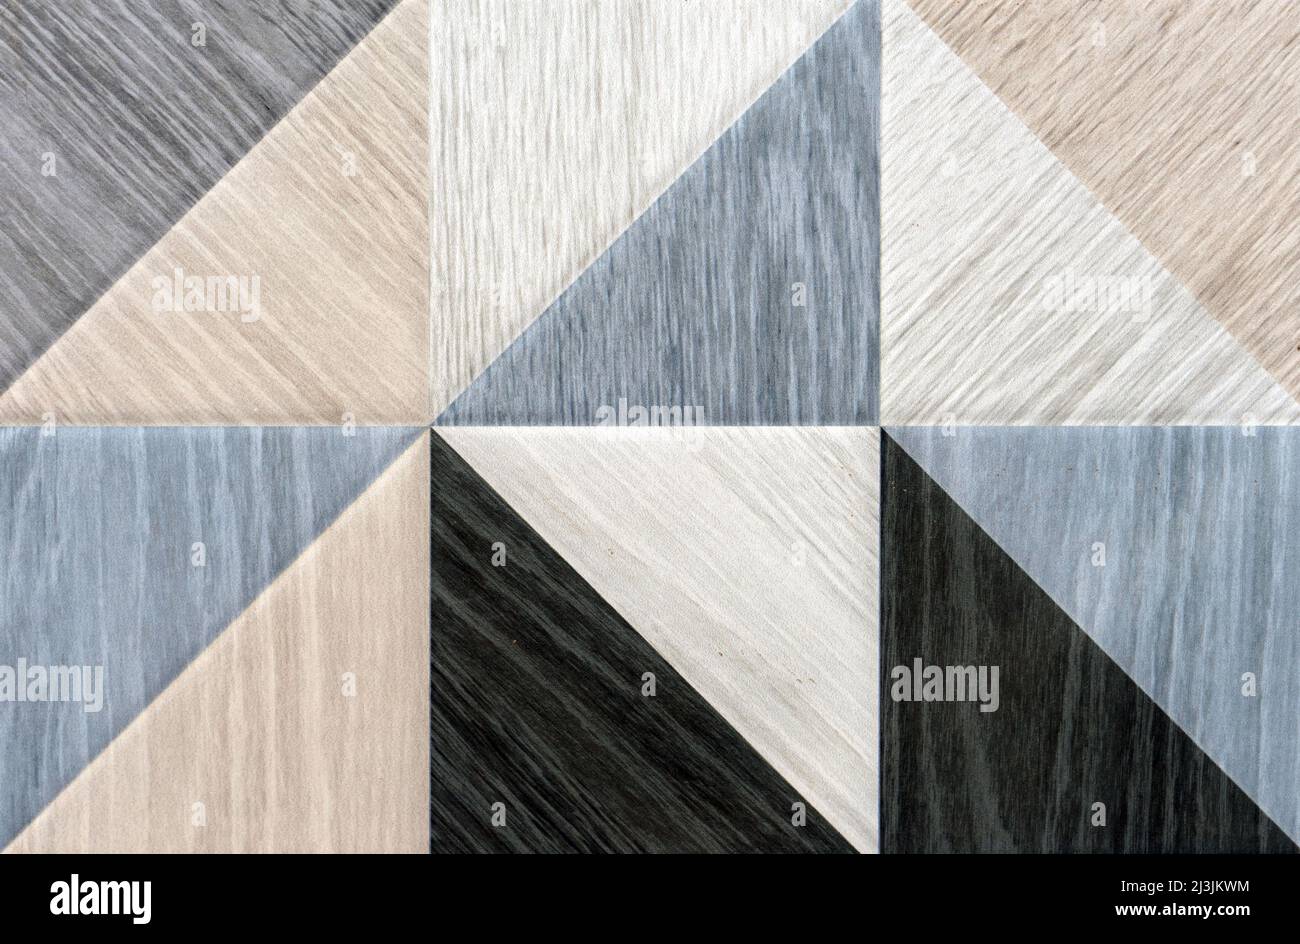 Ceramic tiles in the form of triangles with different textures of wood. Stock Photo